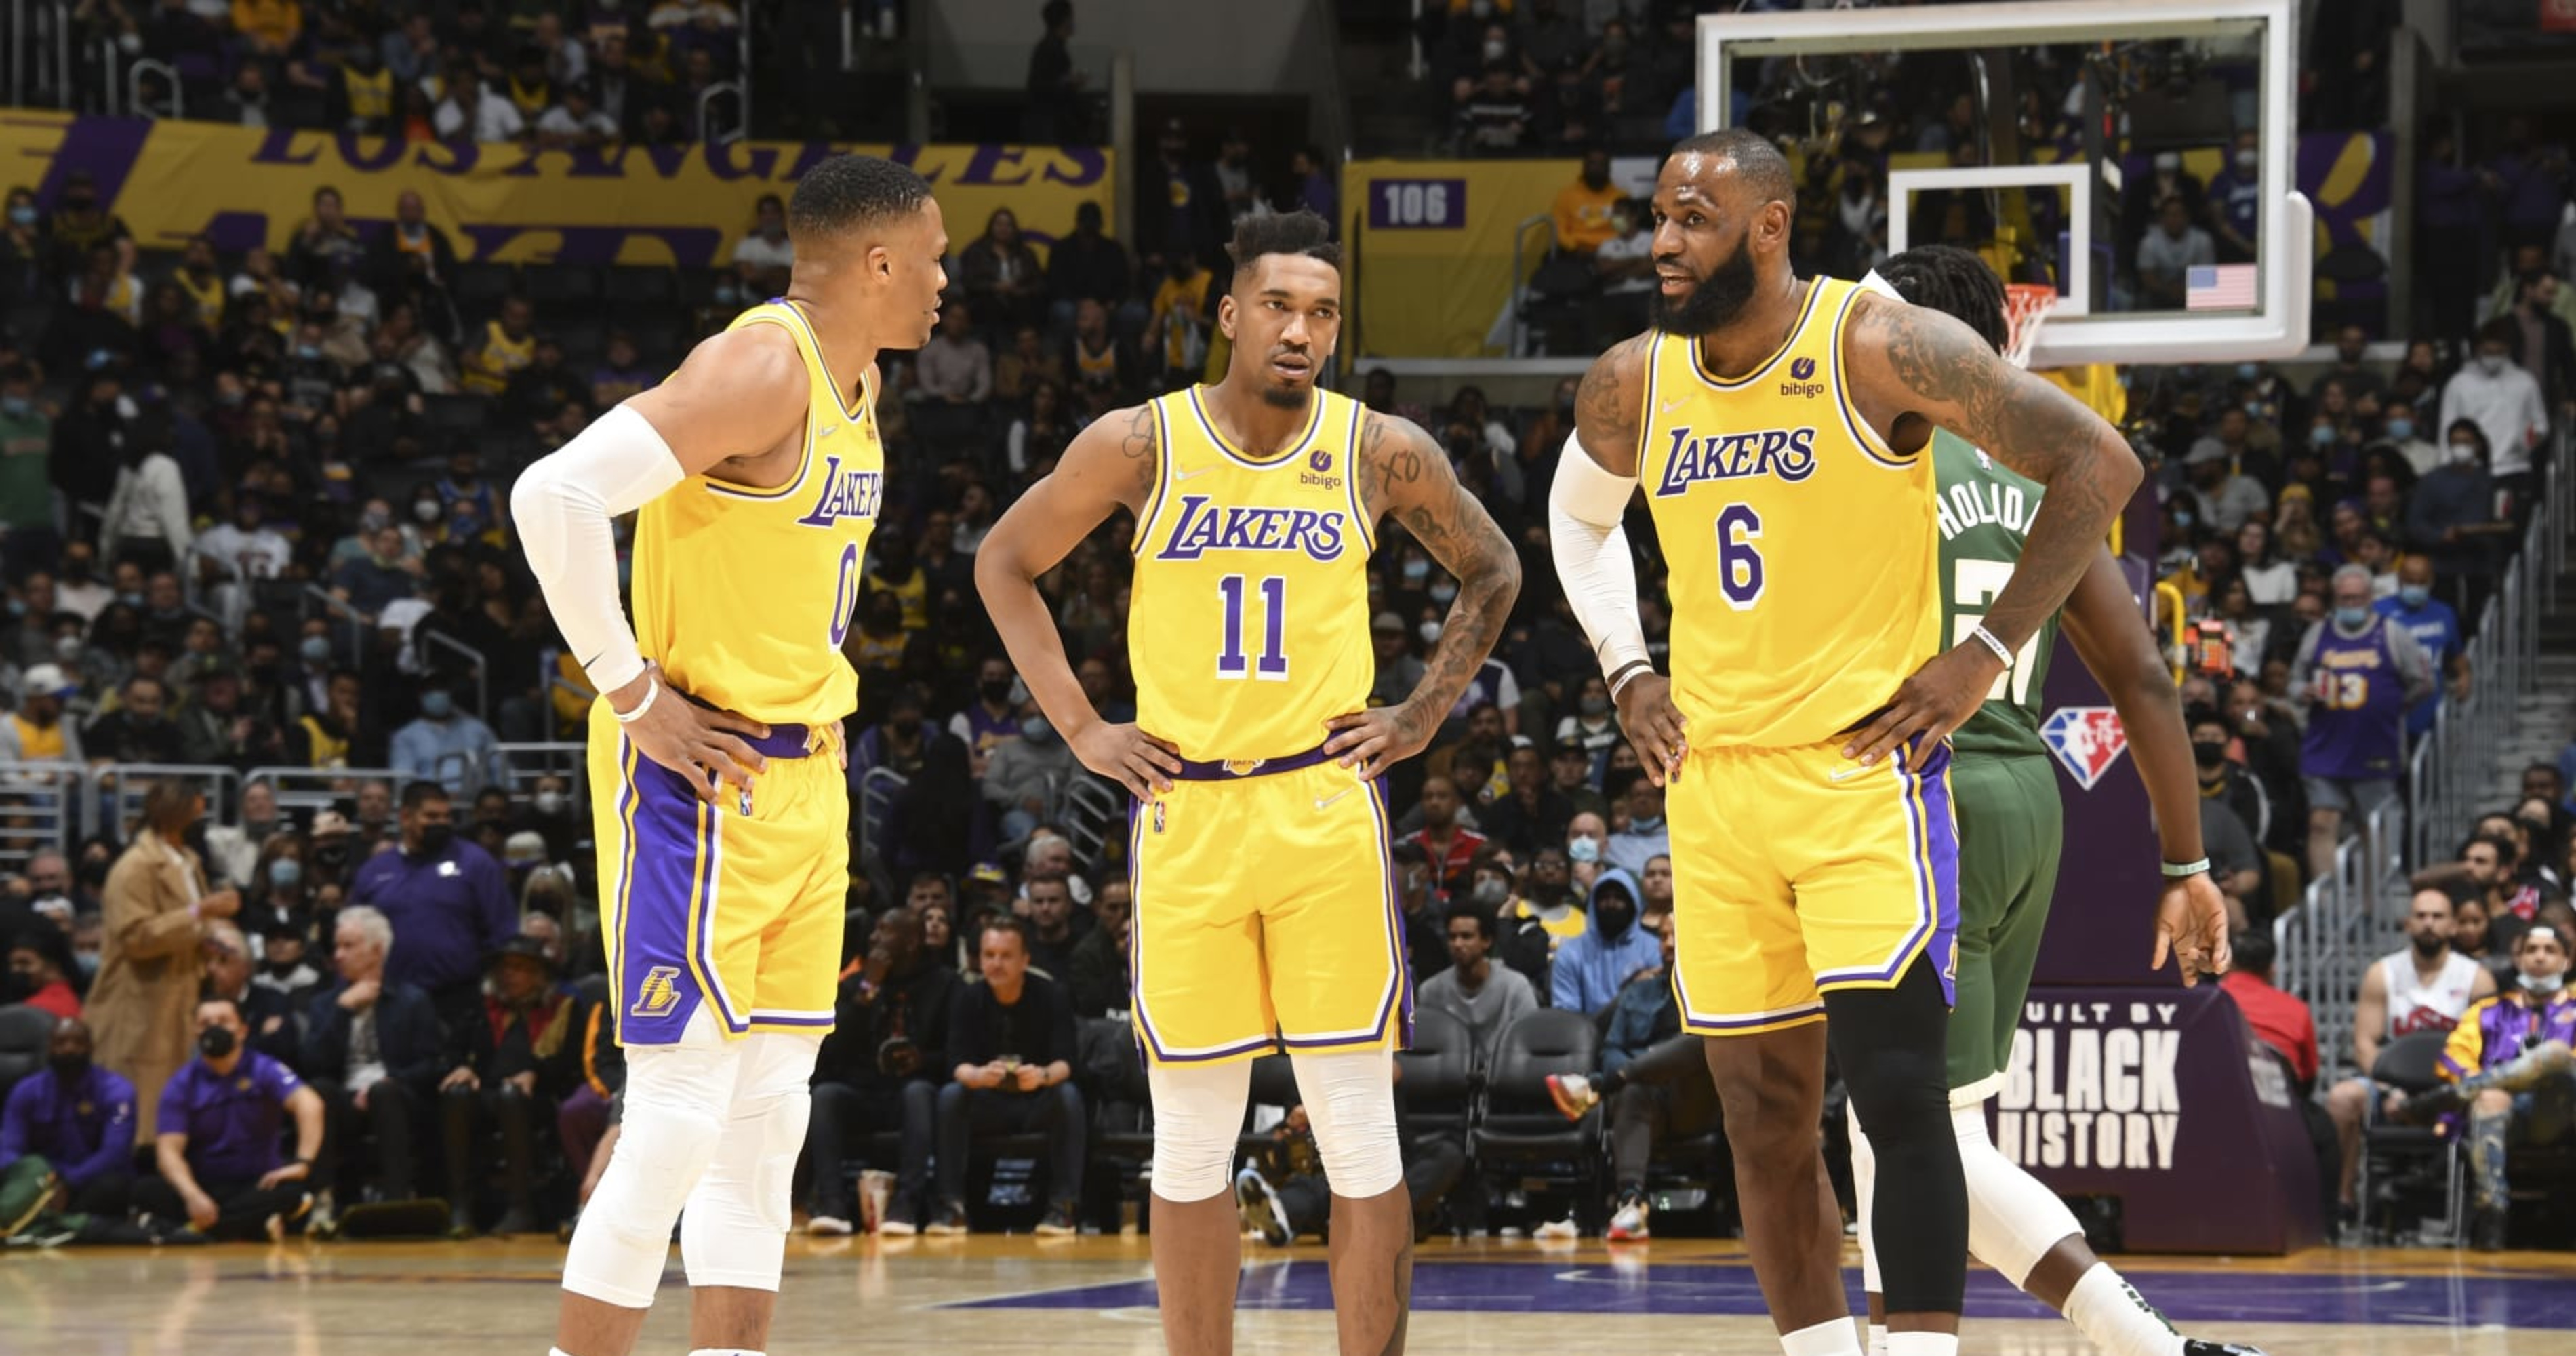 James, Monk help Lakers edge Timberwolves 108-103 - The San Diego